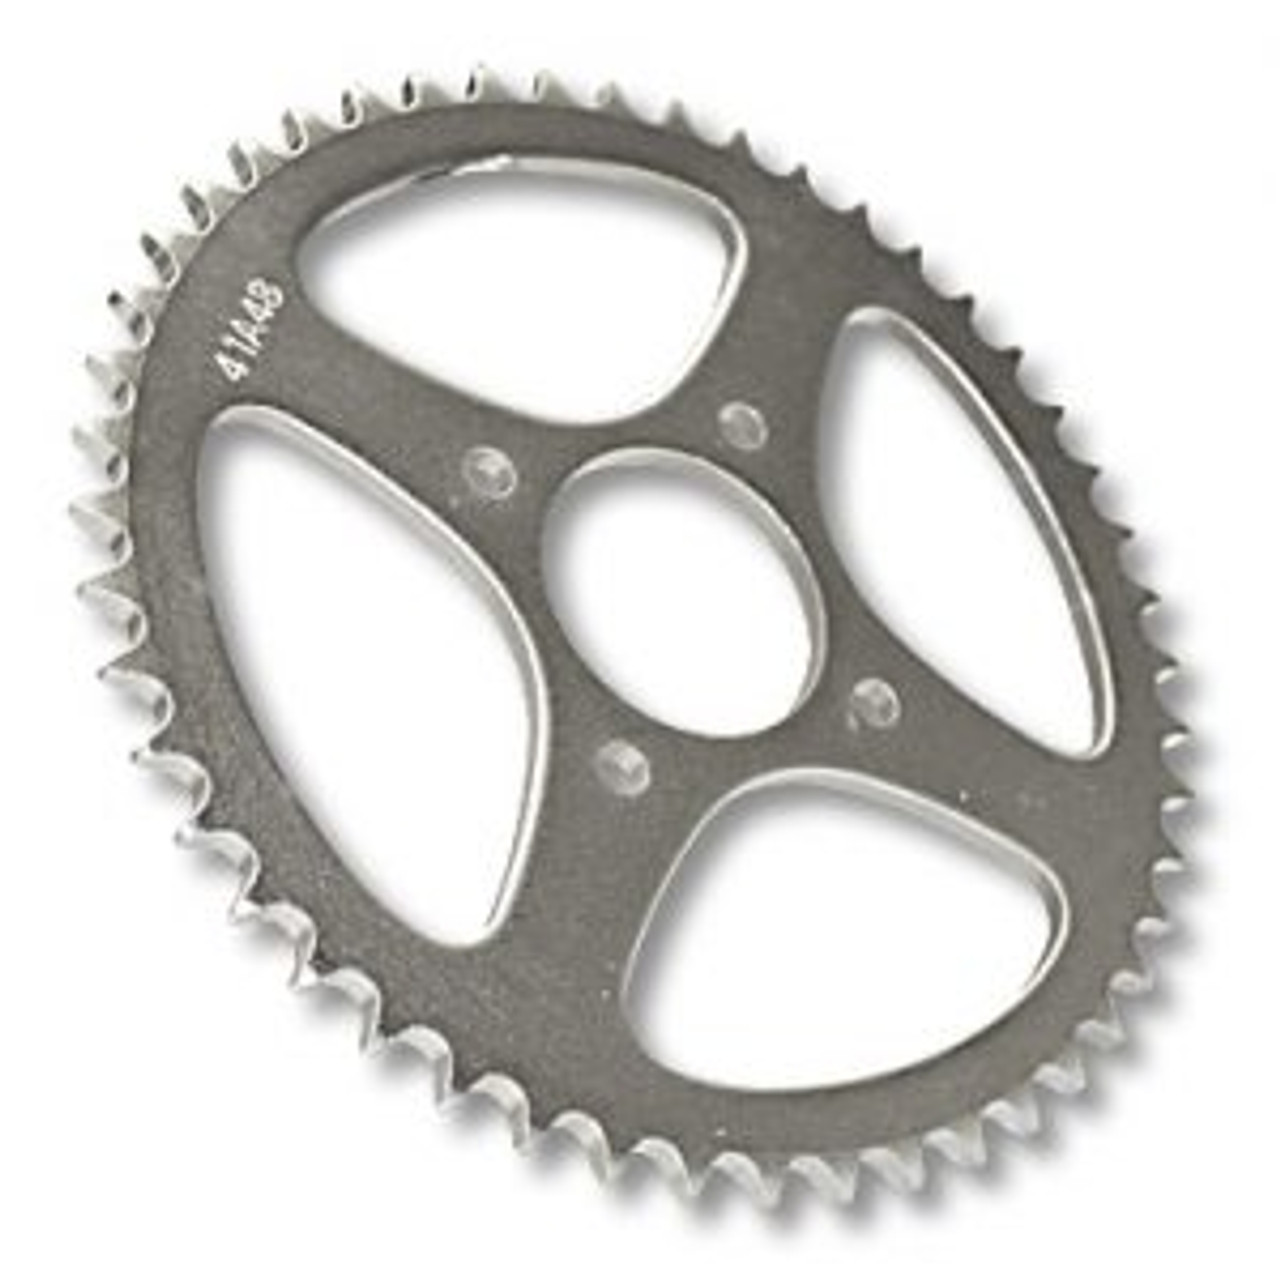 Steel Sprocket #40/41 #420 Chain 2" Bore, 4 Holes@.375", 2.875" Bolt Circle , (P5263) 48 Tooth